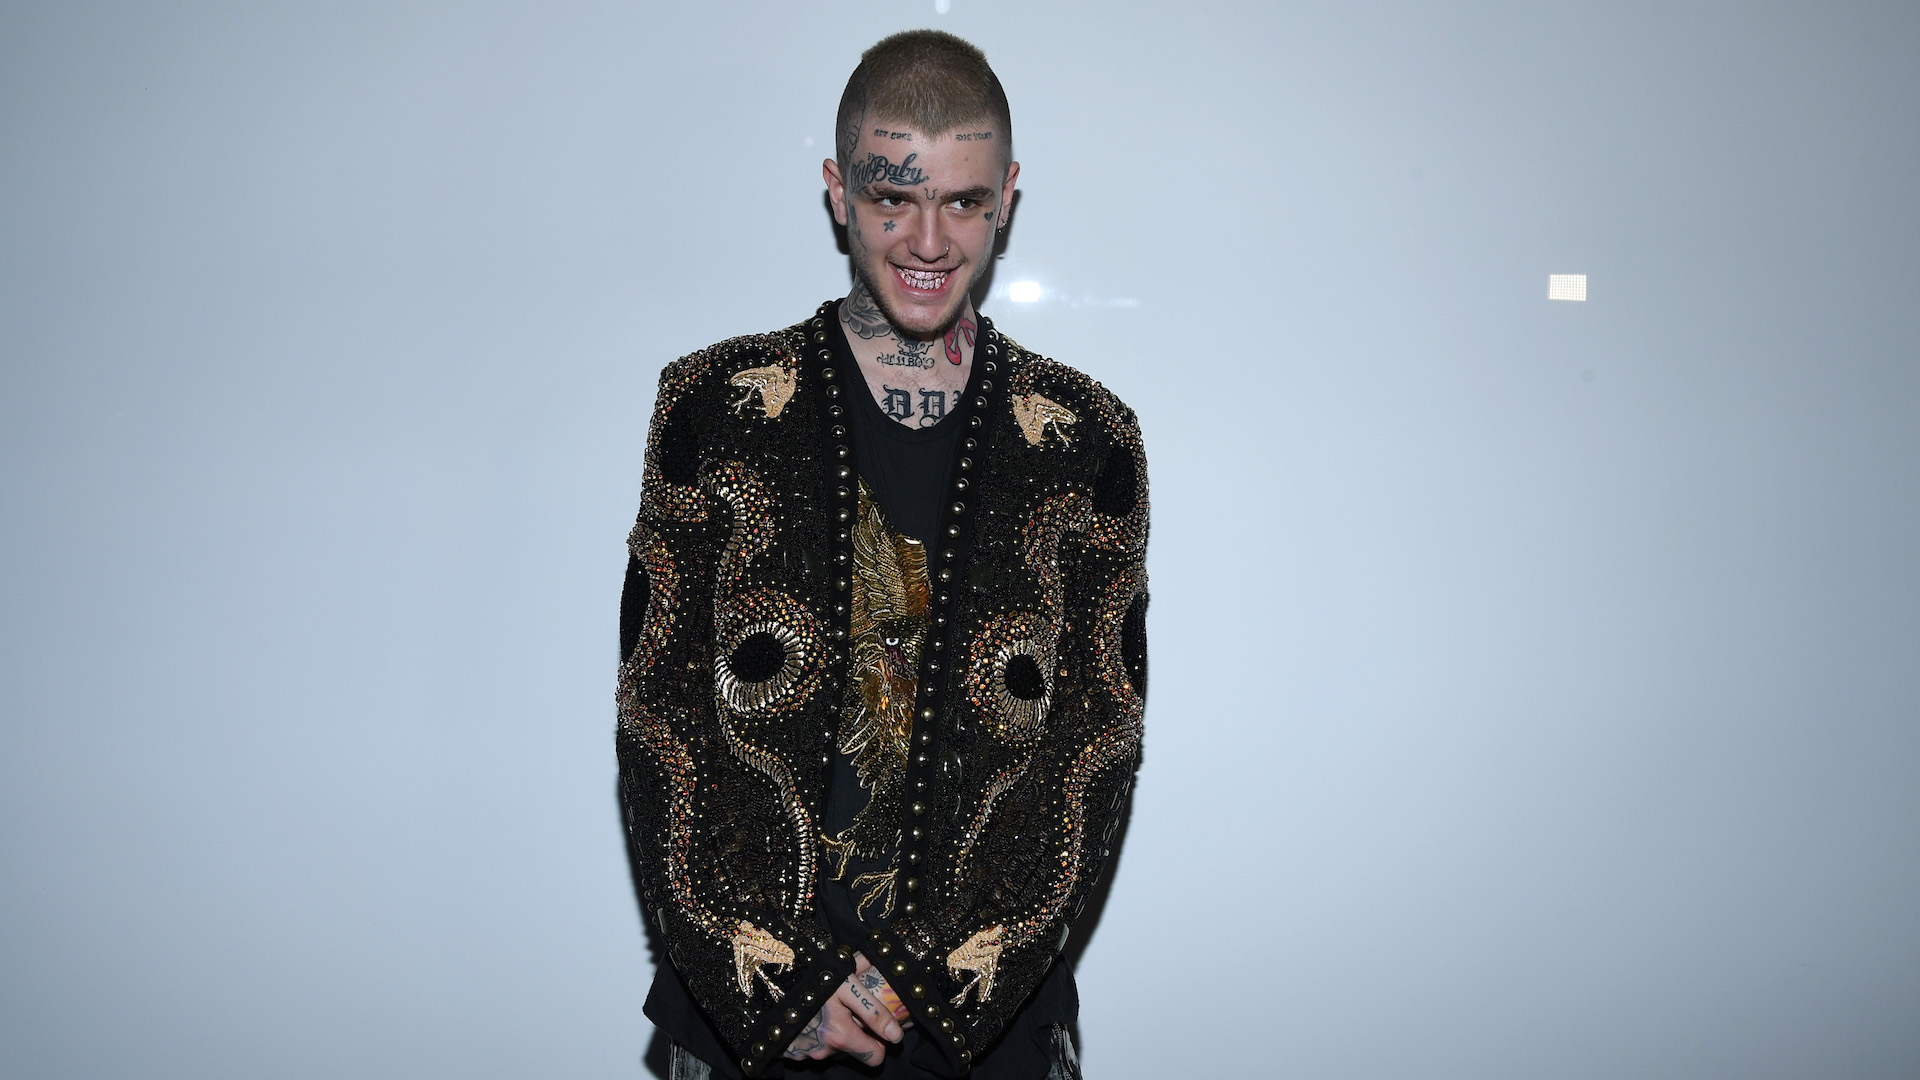 Lil Peep Dies And Fans Mourn The Rising Star Who Combined Hip Hop And Emo The Washington Post